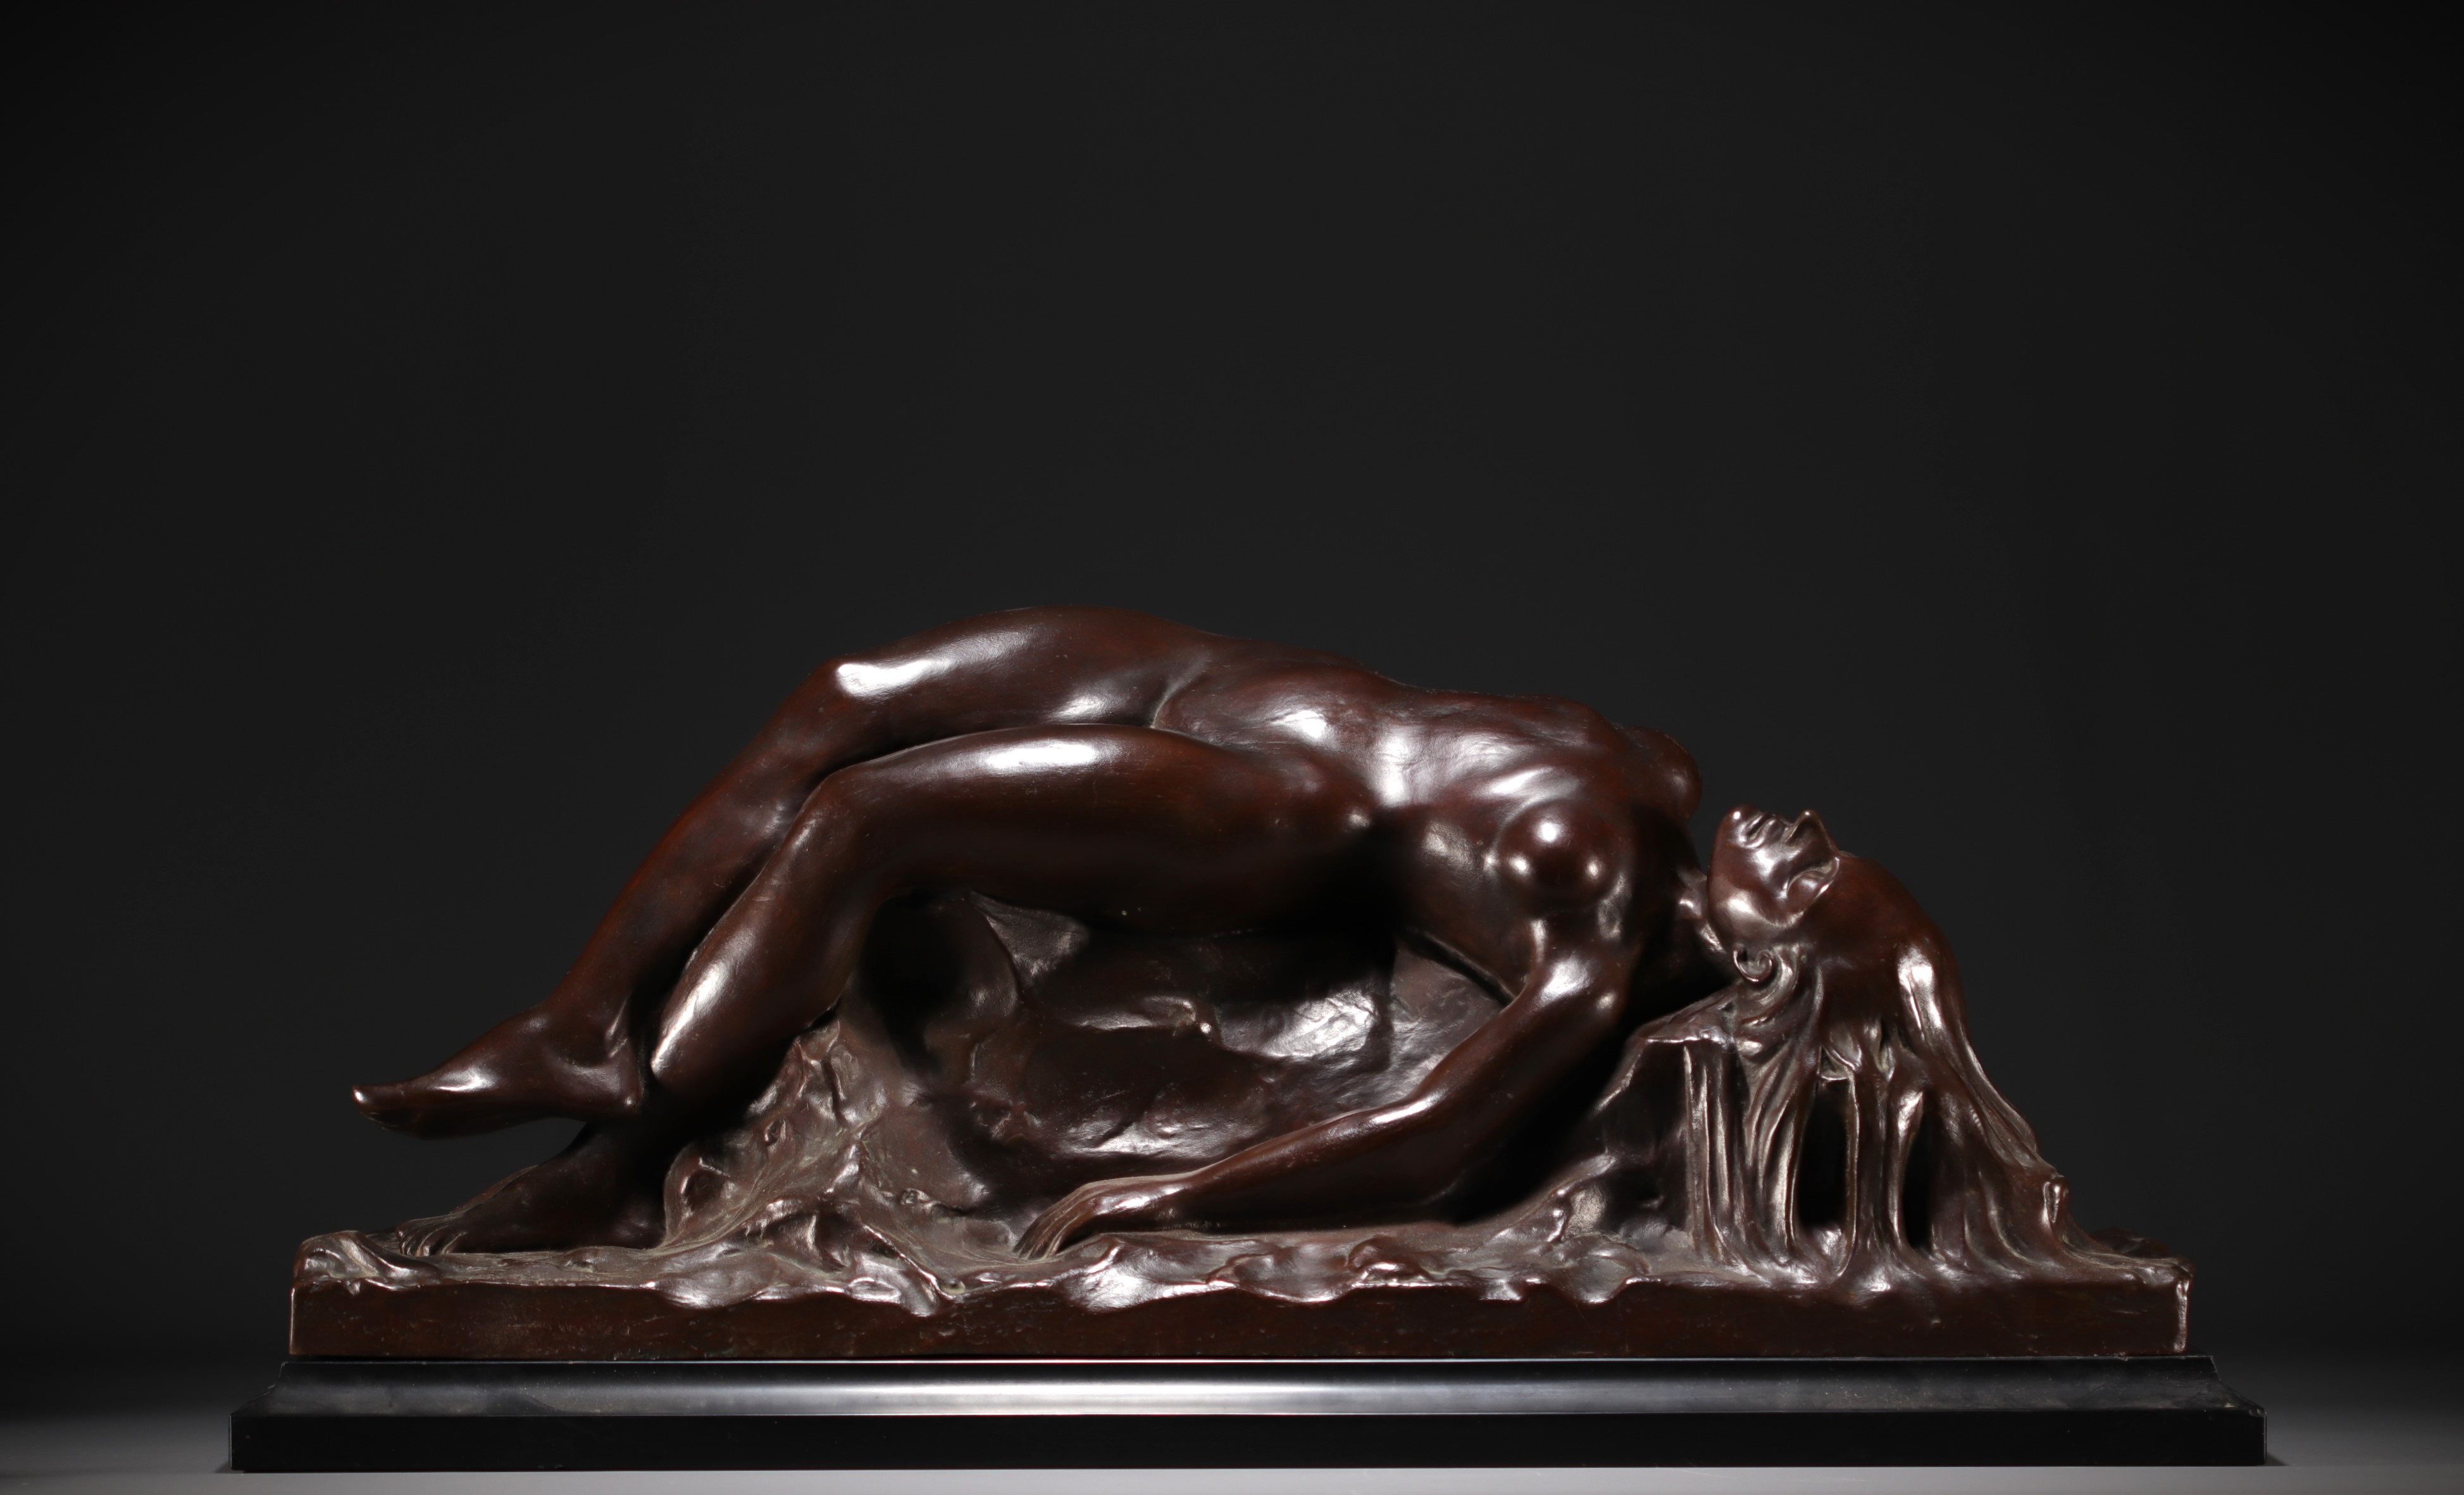 Johan DE MAEGT (1906-1987) "Reclining nude woman" Imposing sculpture in bronze with brown patina on  - Image 4 of 4